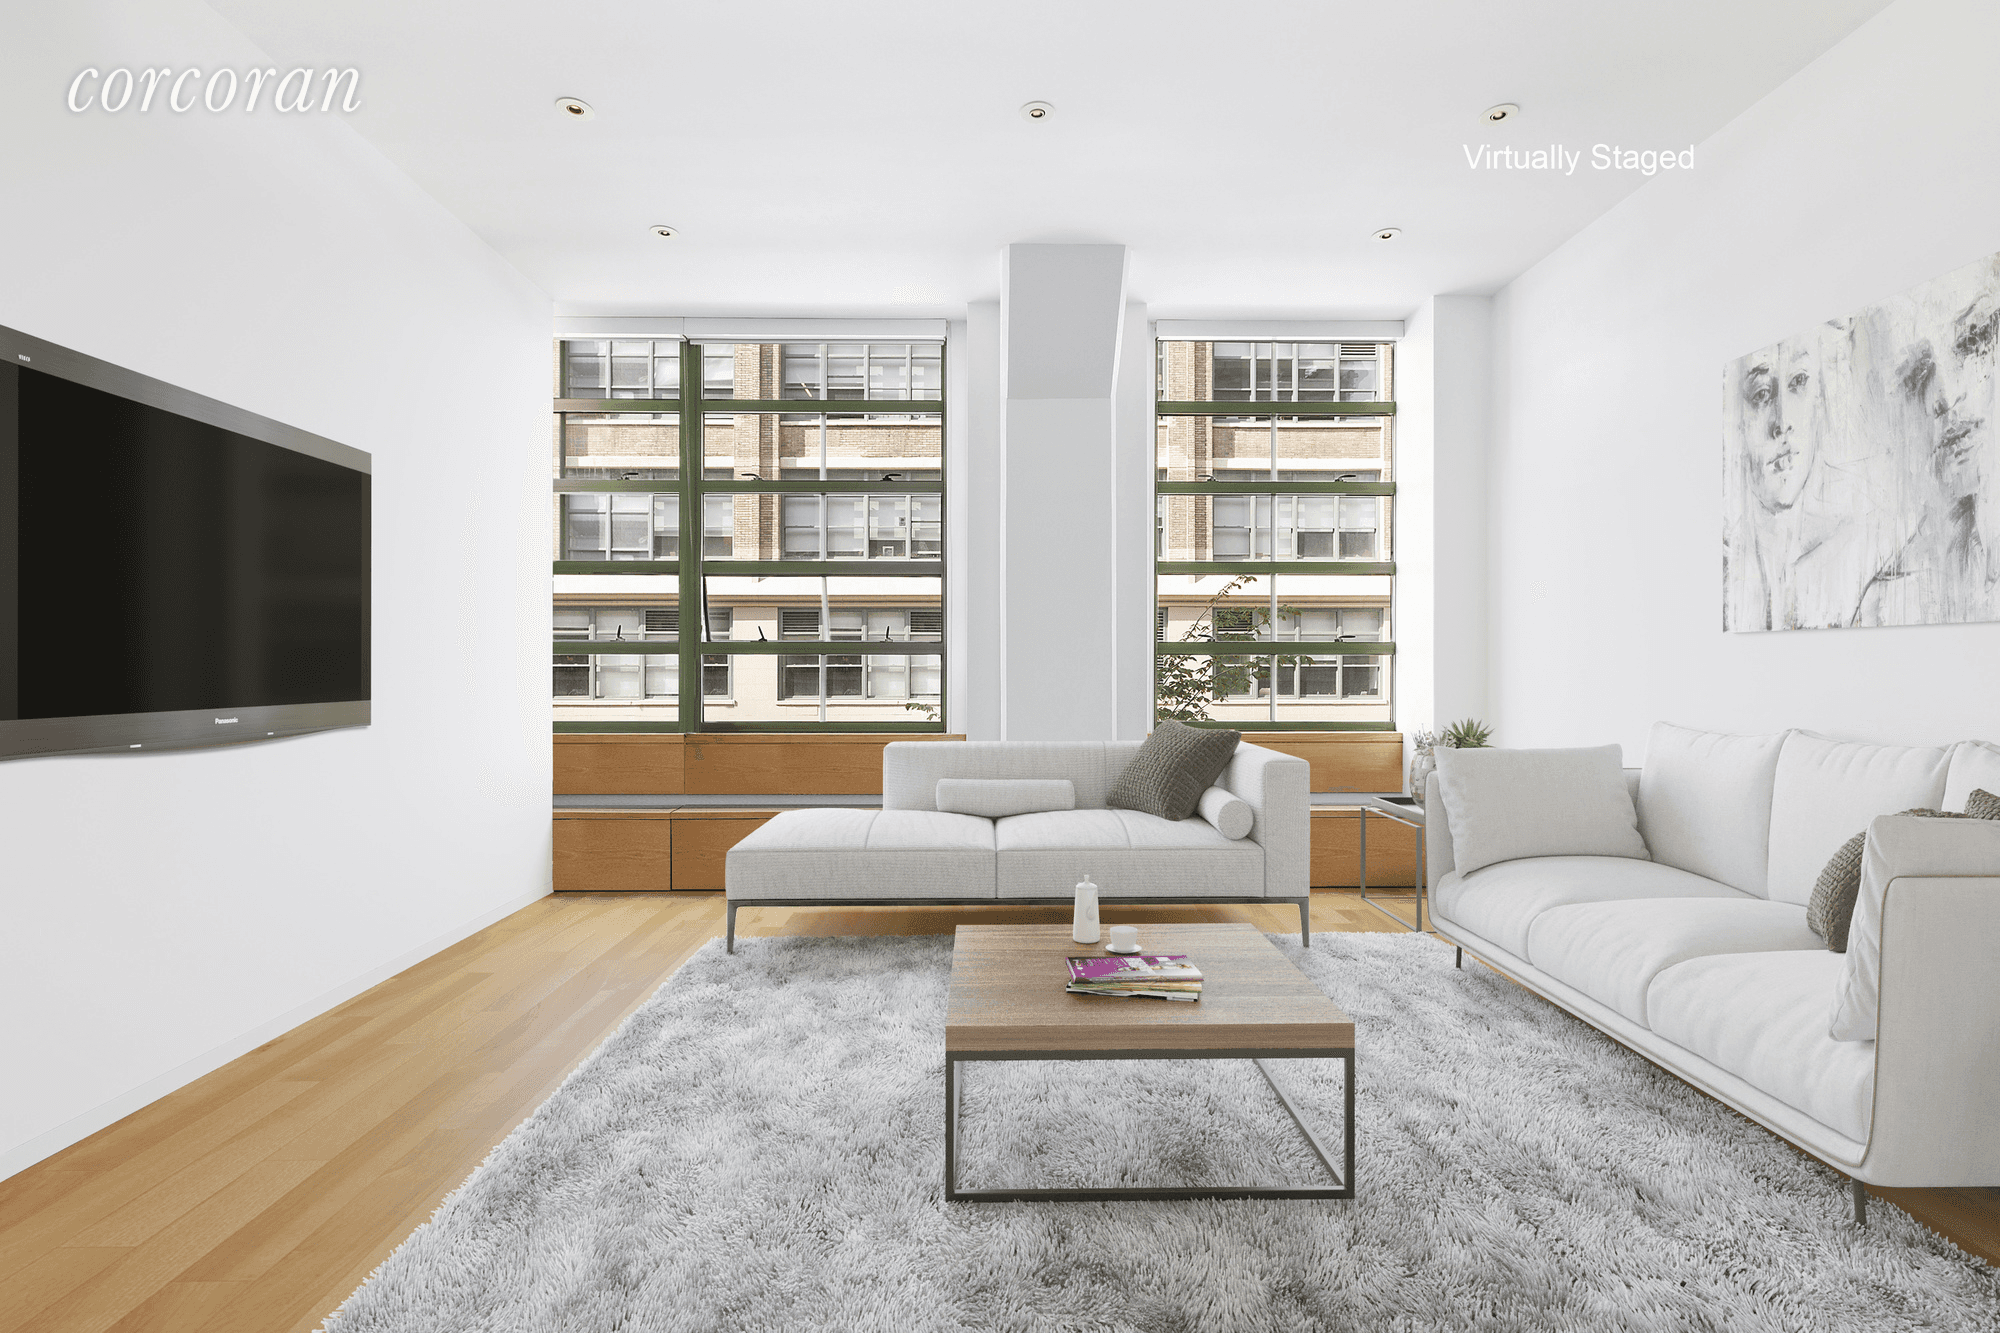 Grand proportions and sleek modern design make this renovated split two bedroom, two bathroom loft home an irresistible find in sought after Tribeca.